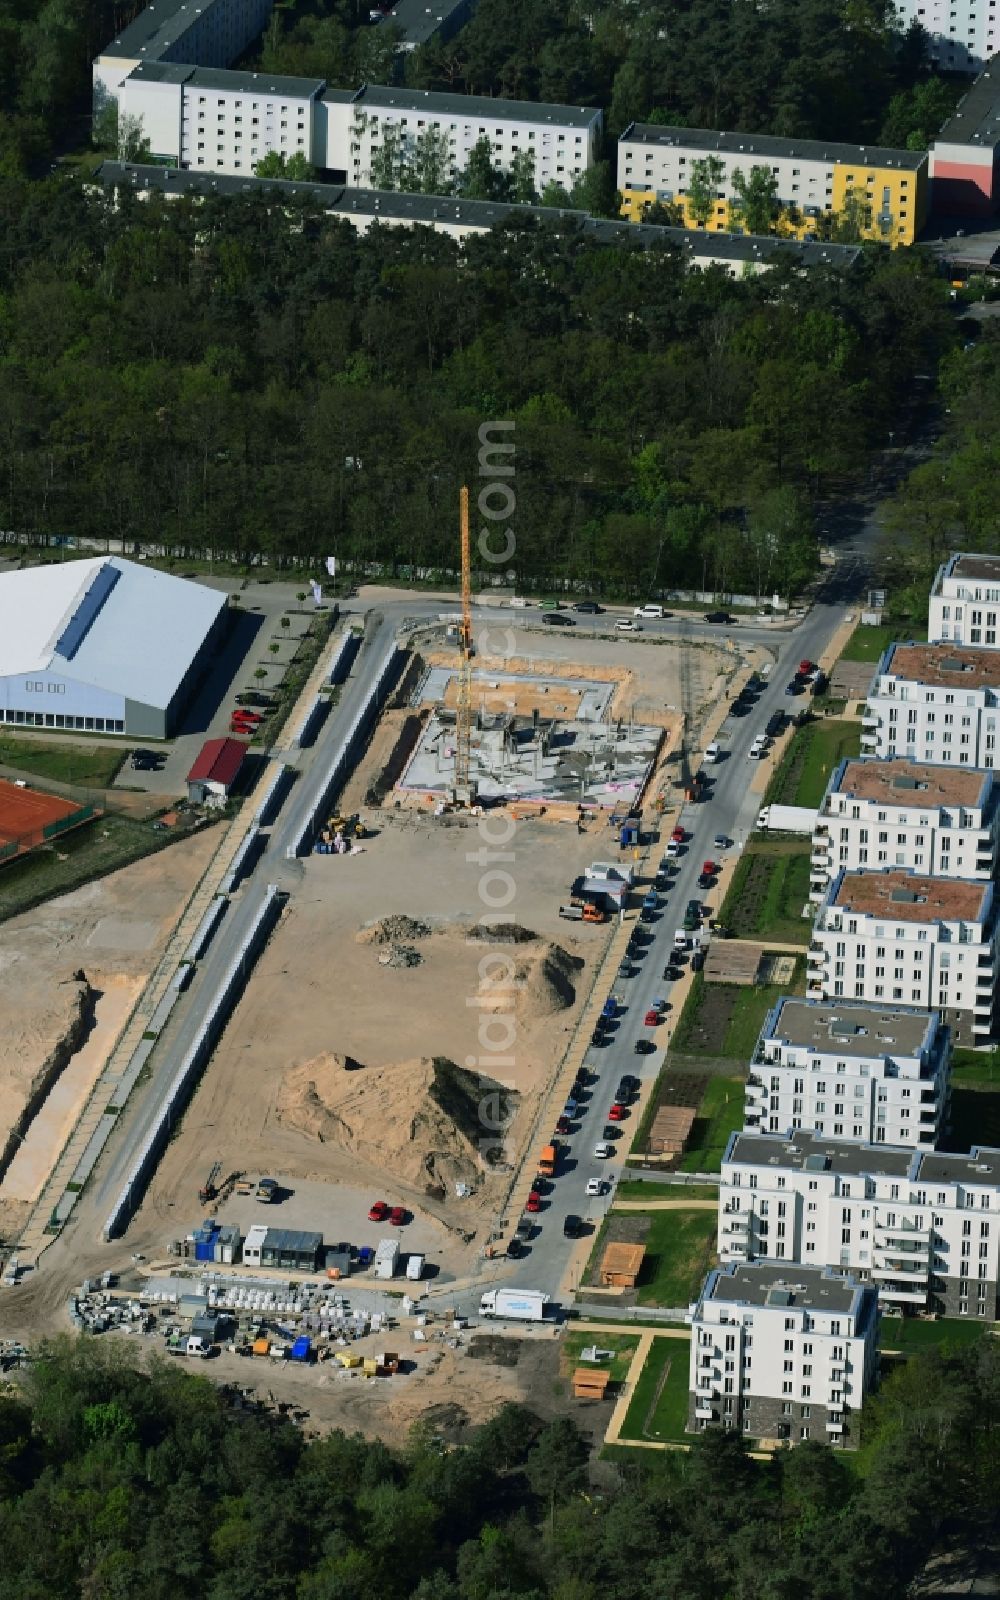 Aerial image Potsdam - Construction site for a health center and medical center between Brunnenallee and Sophie-Alberti-Strasse in Potsdam in the state Brandenburg, Germany